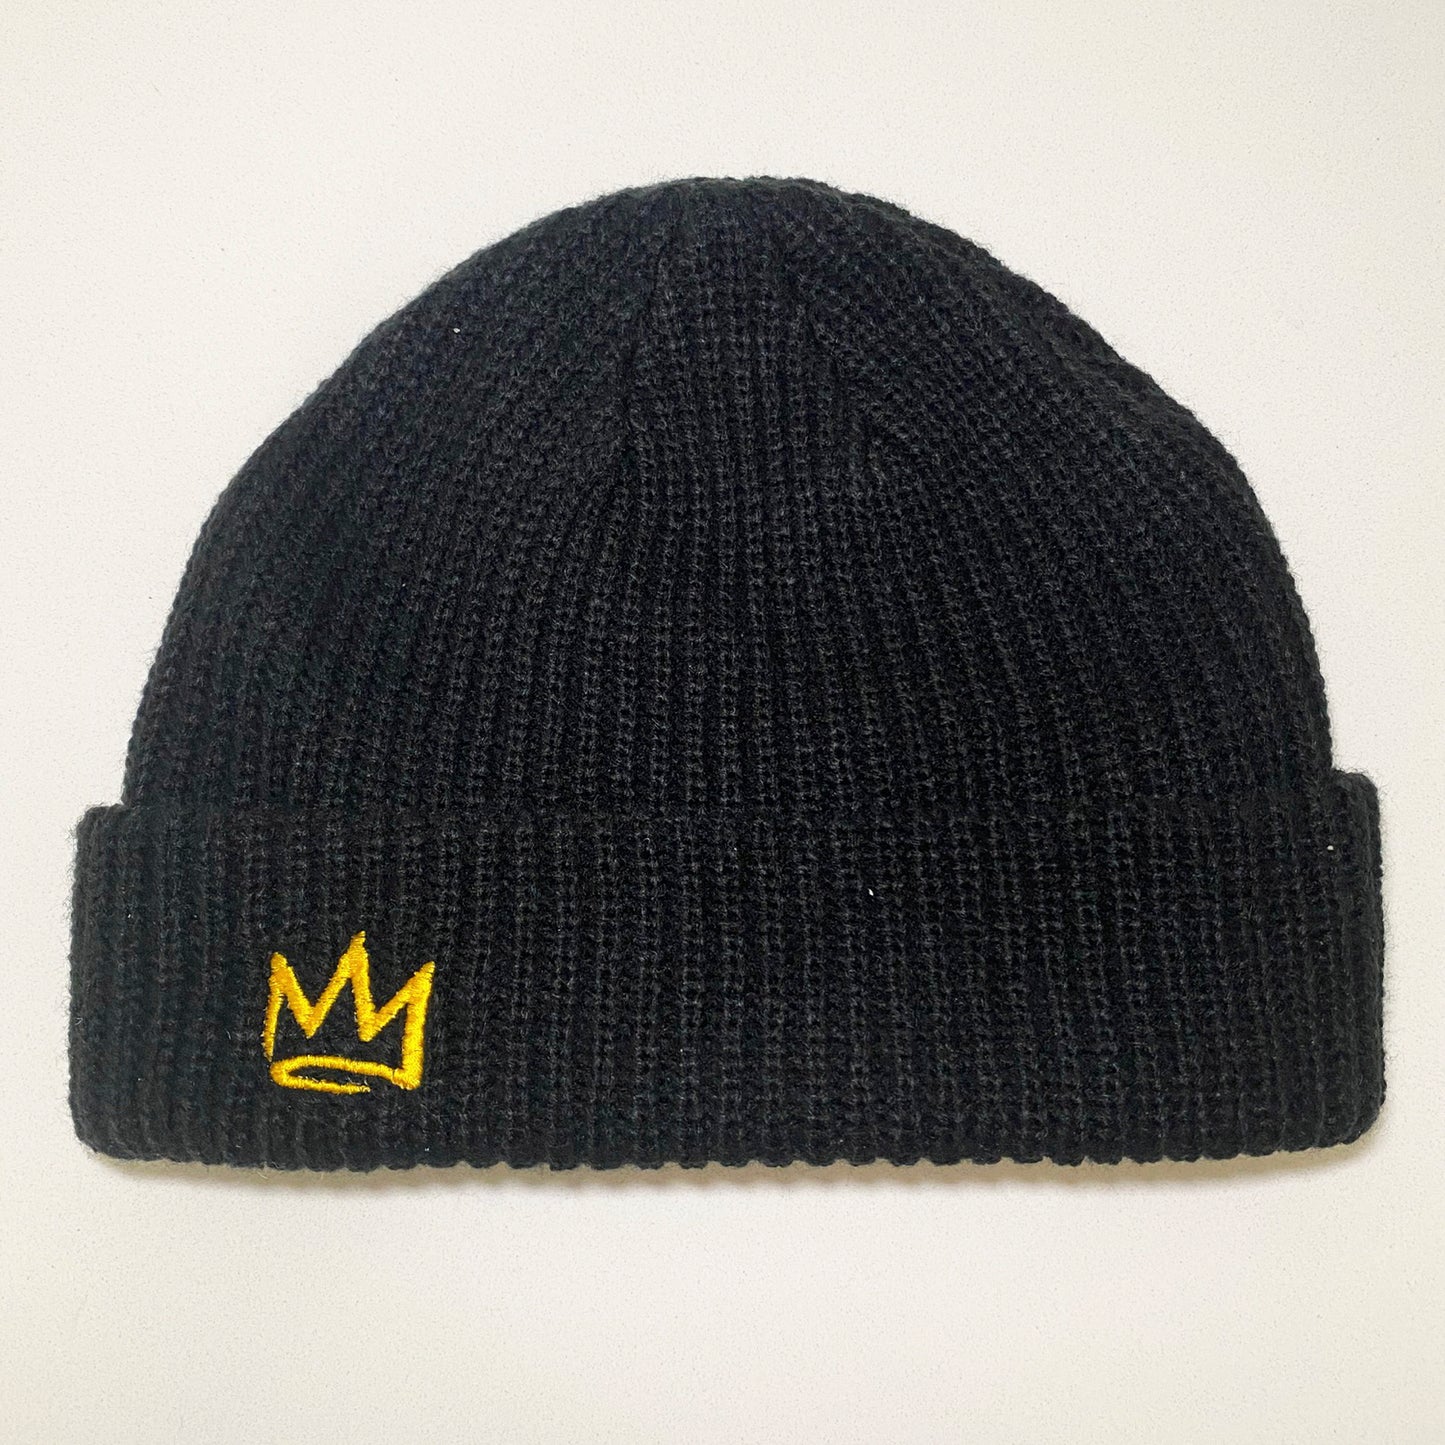 Cable Knit Beanie Black